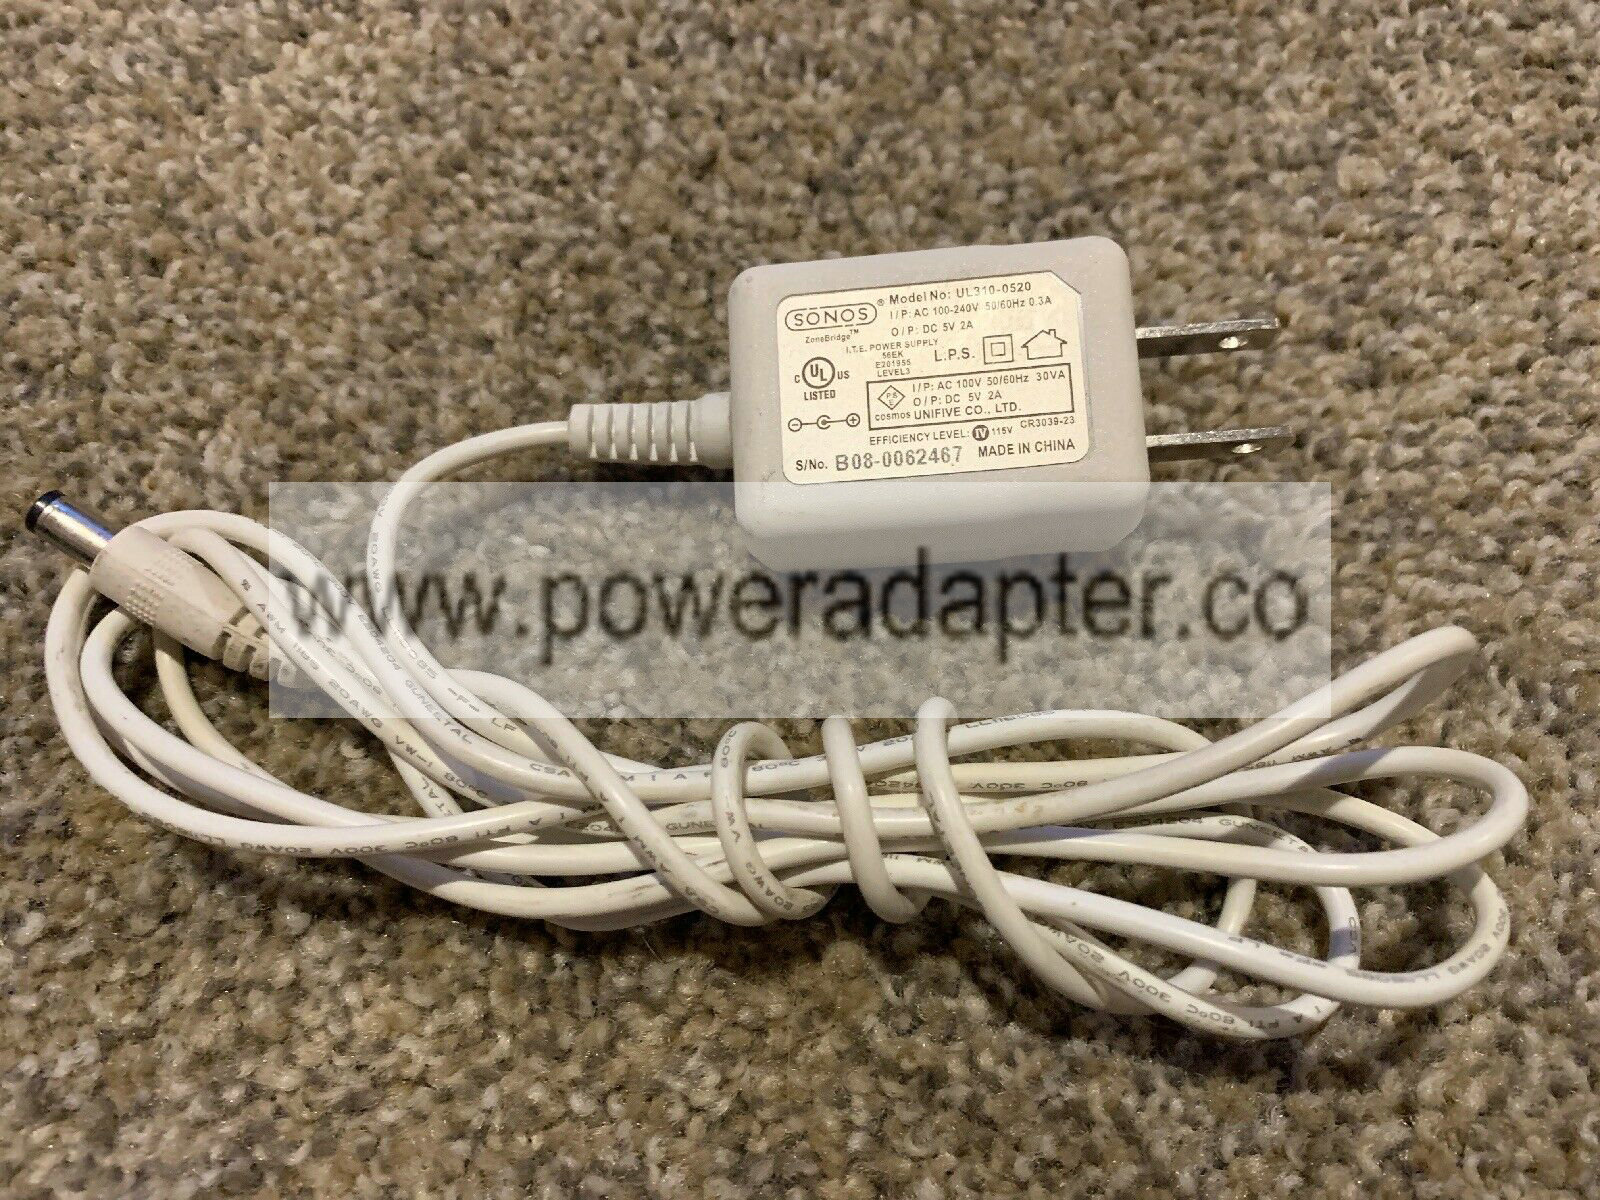 SONOS UL310-0520 POWER SUPPLY 6ft. CABLE ADAPTER 5V AC SONOS UL310-0520 POWER SUPPLY 6ft. CABLE ADAPTER 5V AC. Condit - Click Image to Close